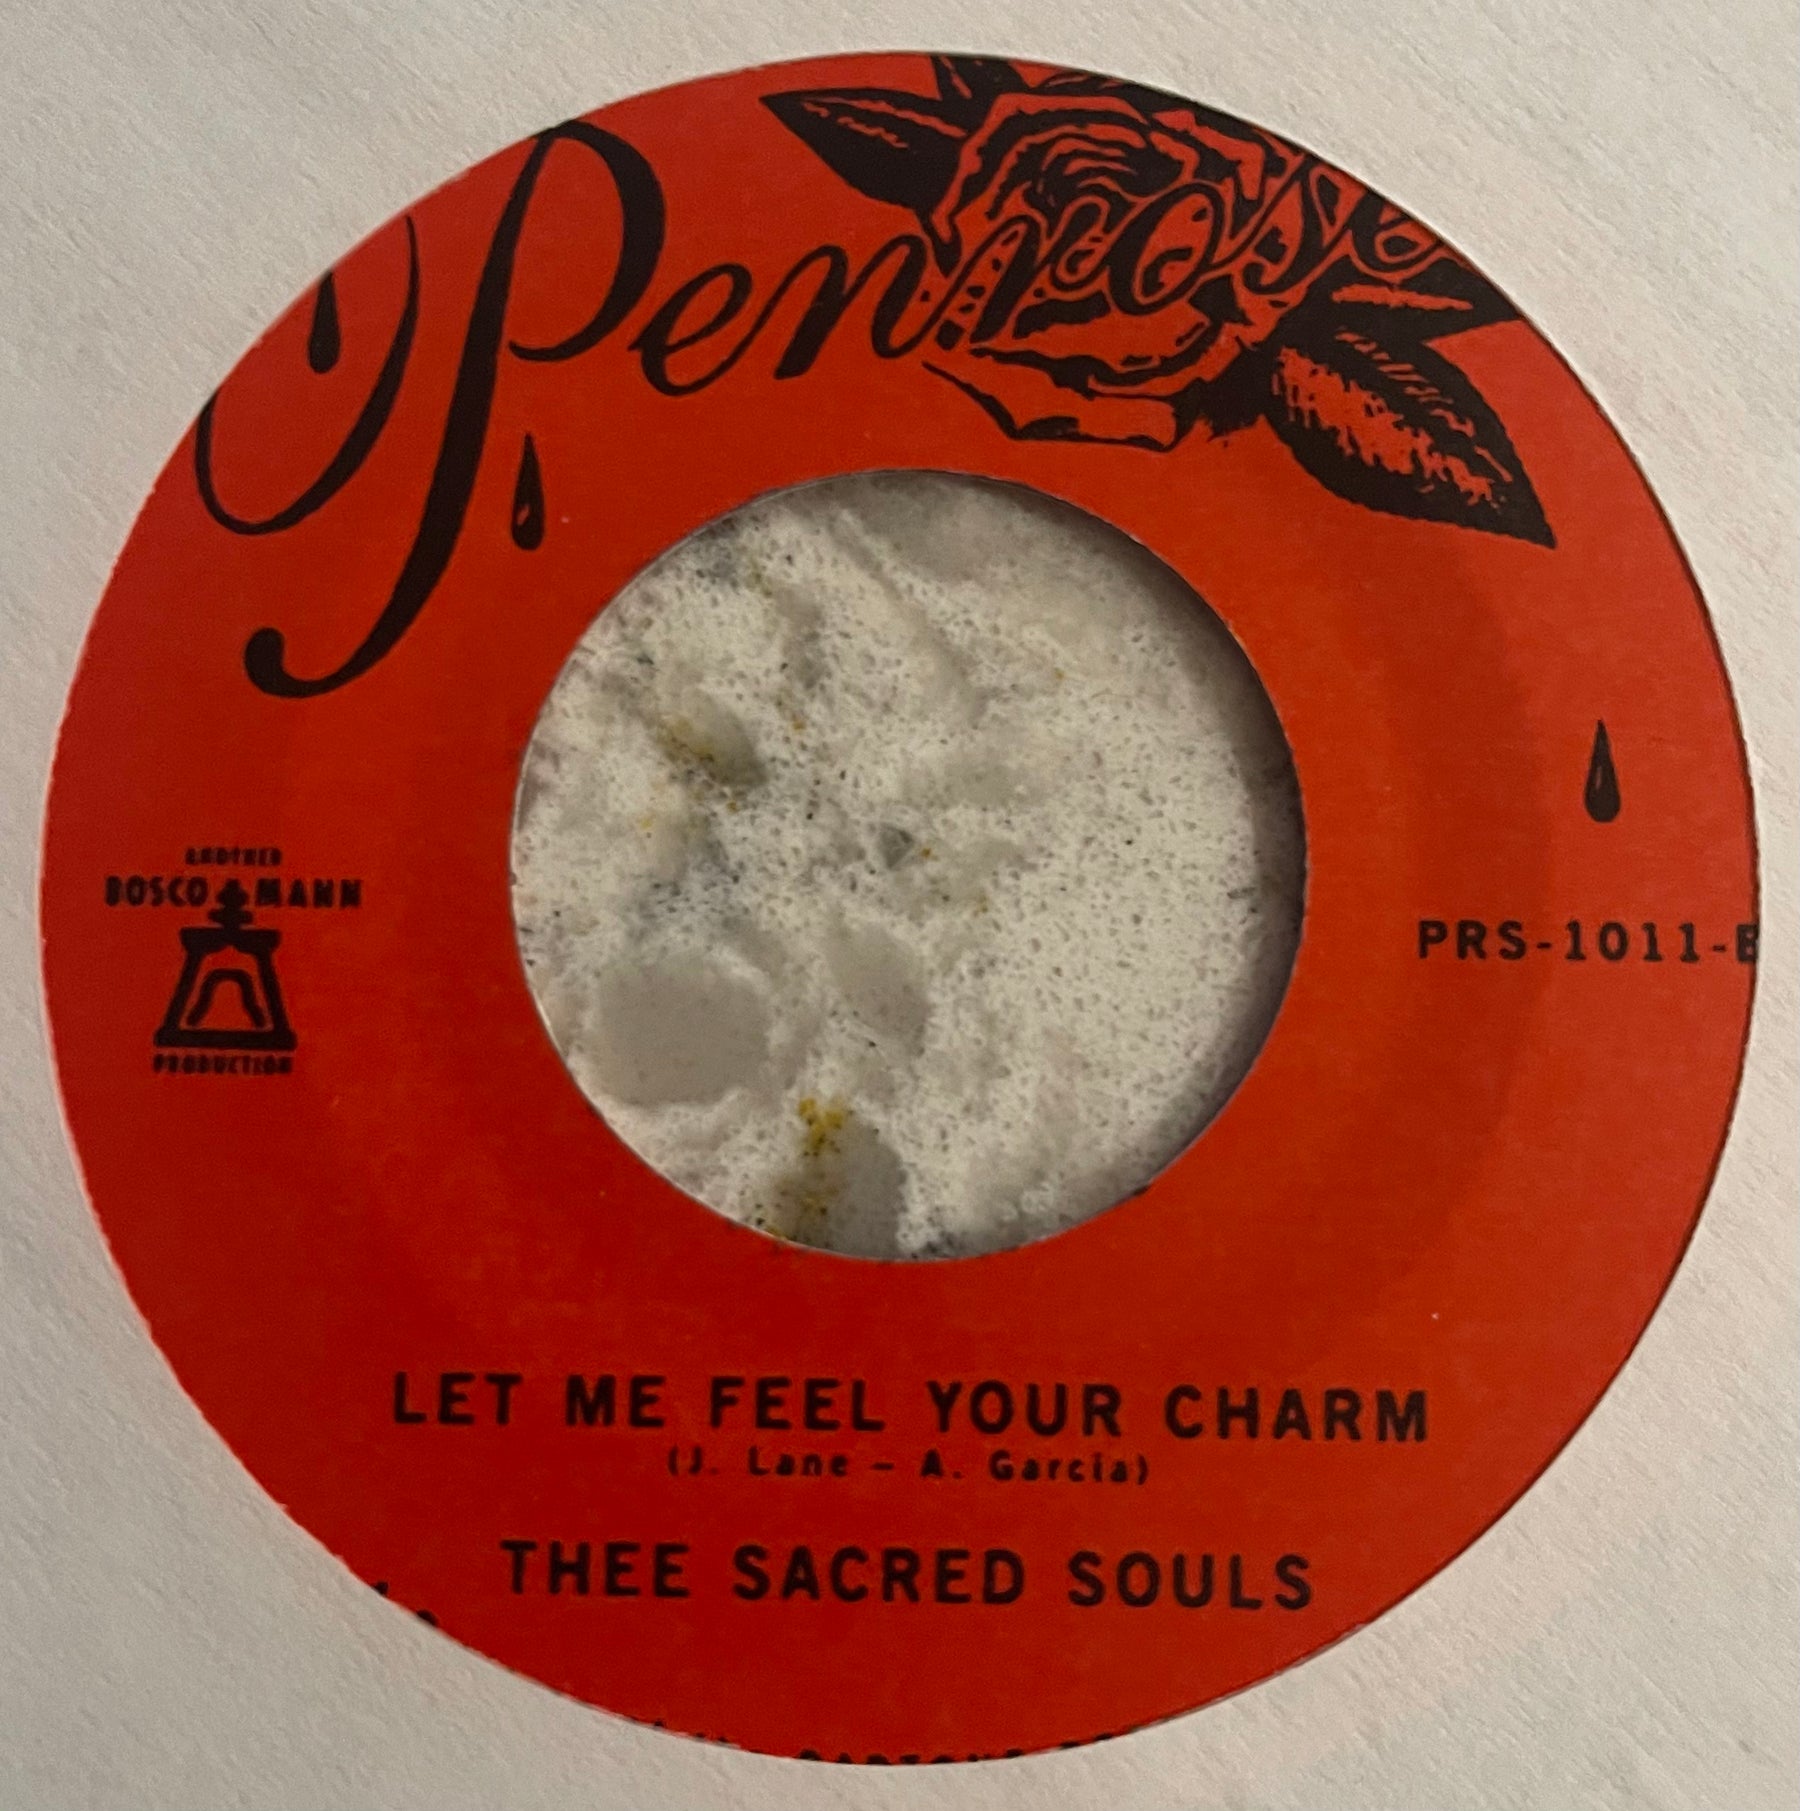 Thee Sacred Souls - Trade Of Hearts b/w Let Me Feel Your Charm